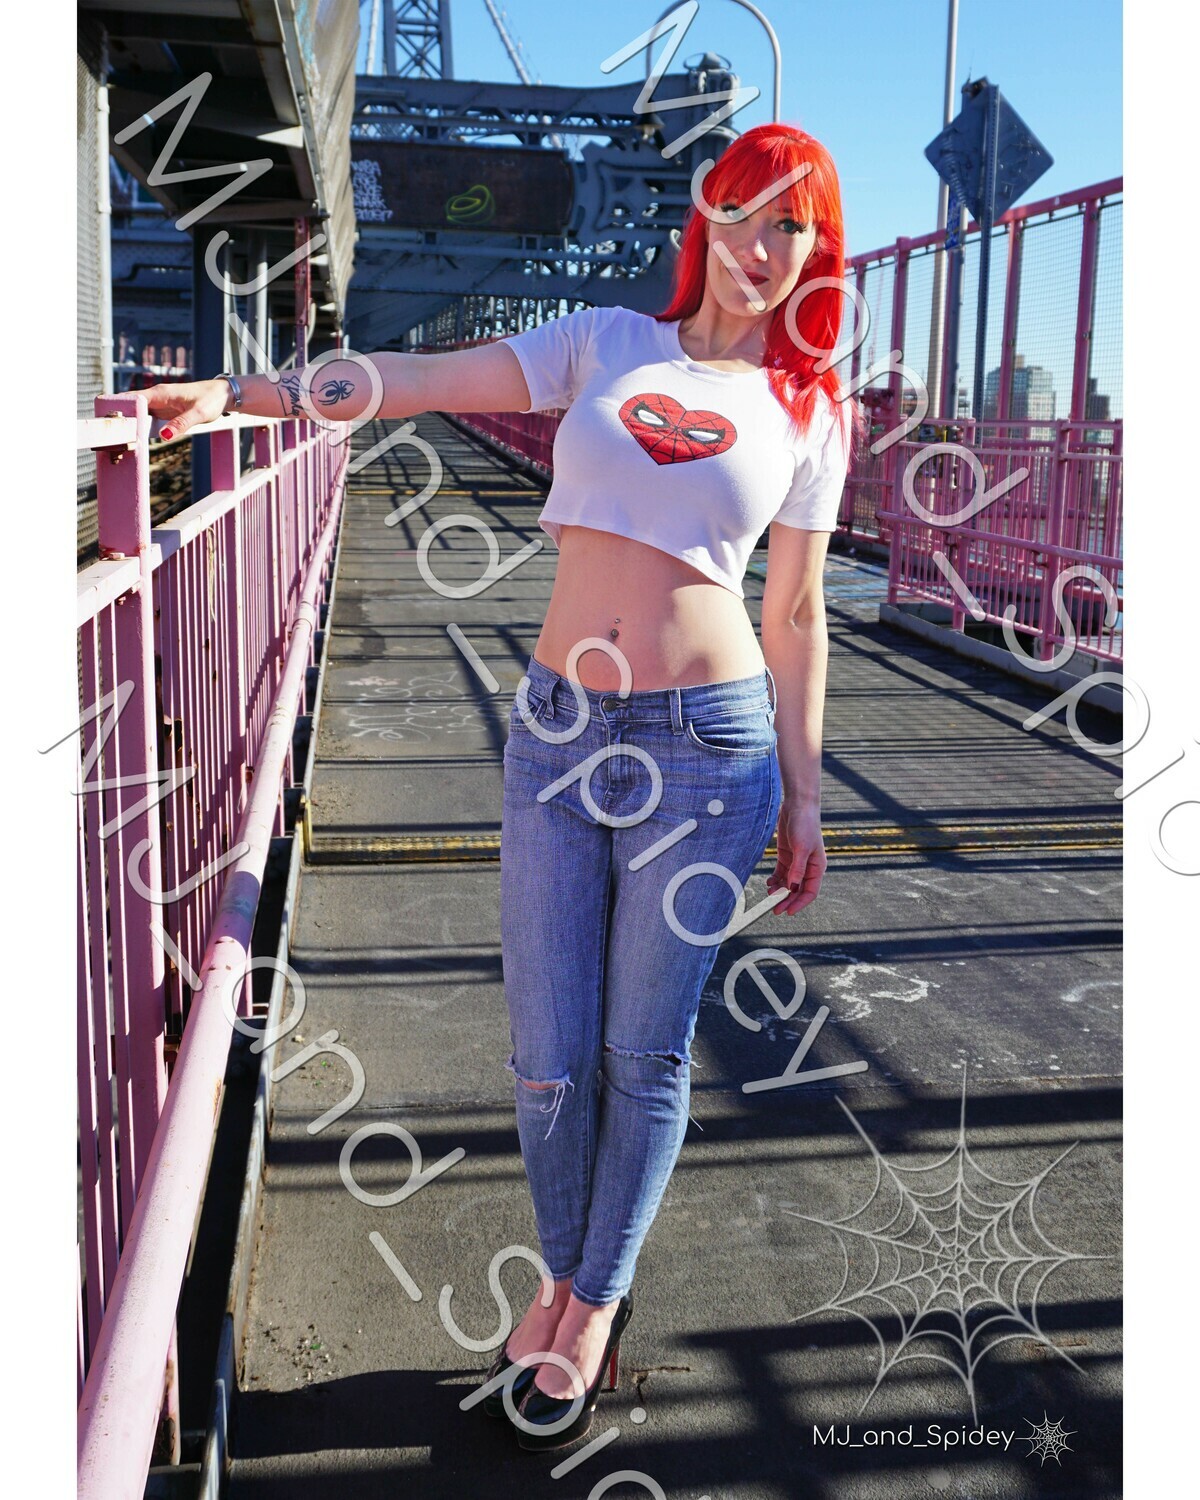 Marvel - Spider-Man - Mary Jane Watson - Classic 0 - 8.5x11 Cosplay Print (@MJ_and_Spidey, MJ and Spidey, Comics)